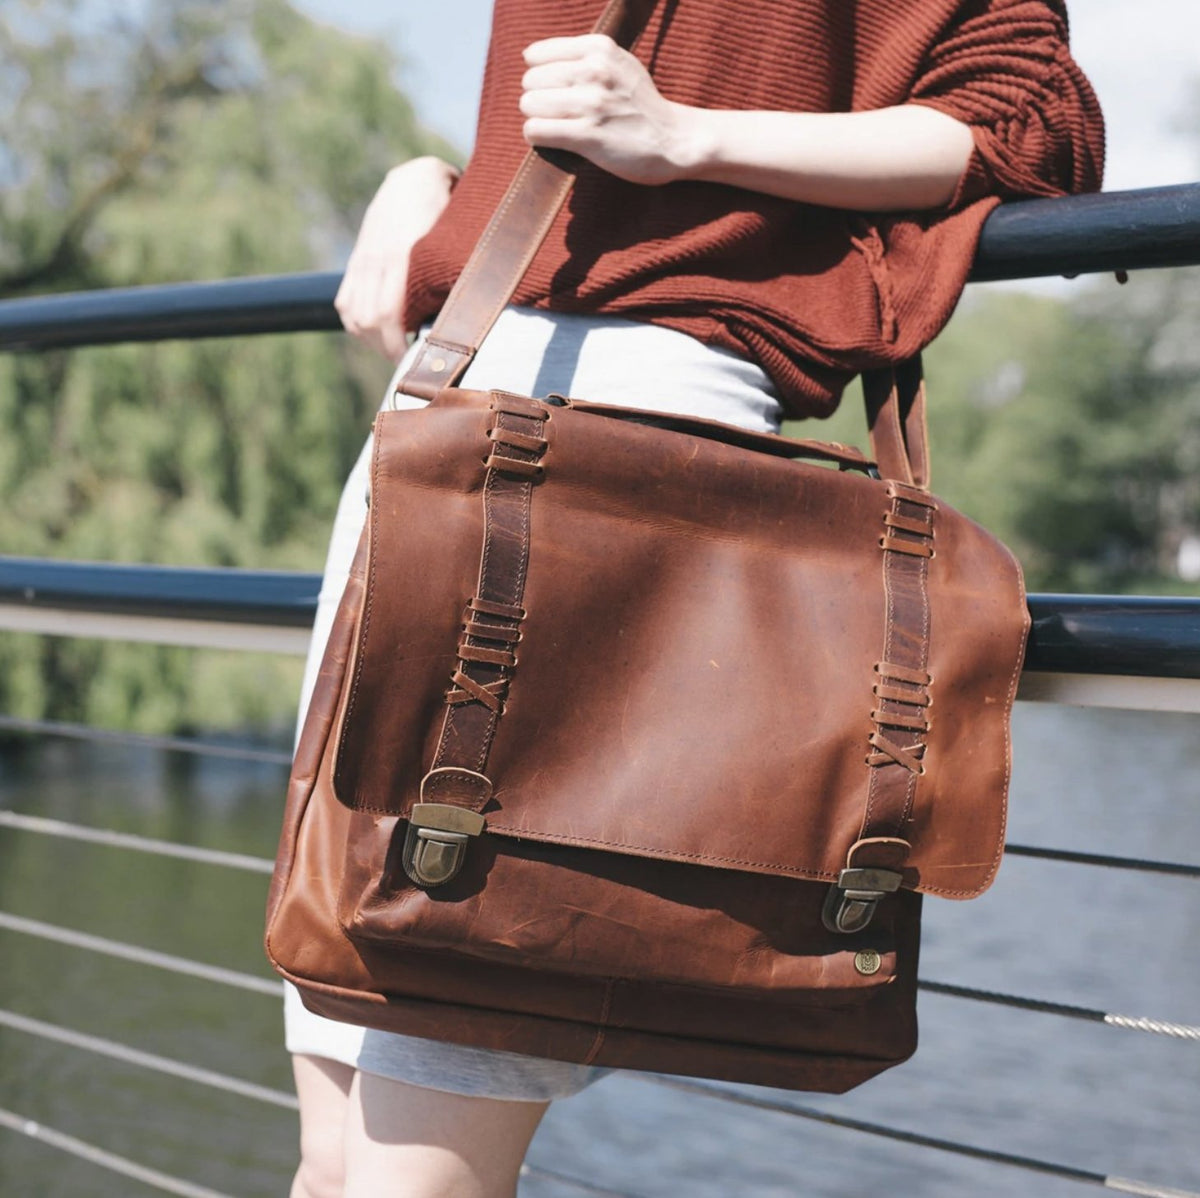 Bags &amp; Luggage - Women&#39;s Bags - Crossbody Bags Leather Satchel Bag